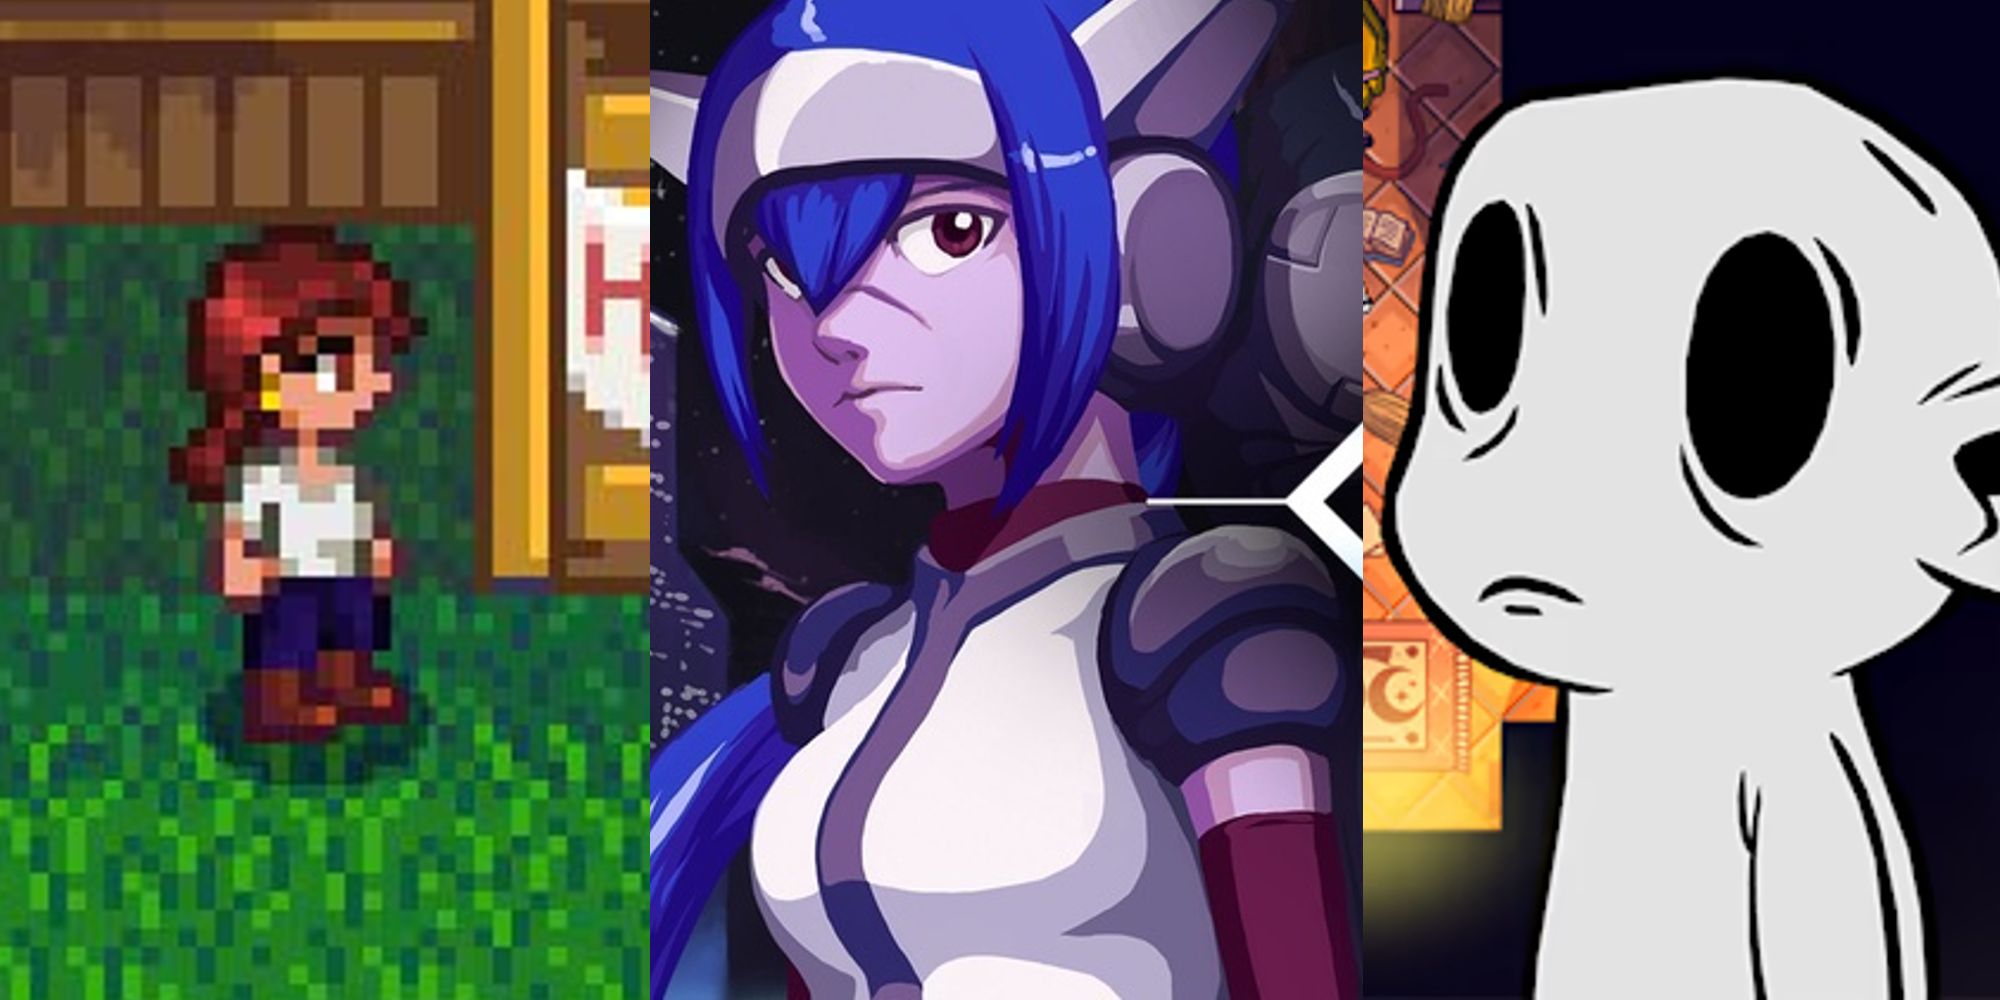 A player character in Stardew Valley; Lea in art for Crosscode; Nobody in Nobody Saves the World